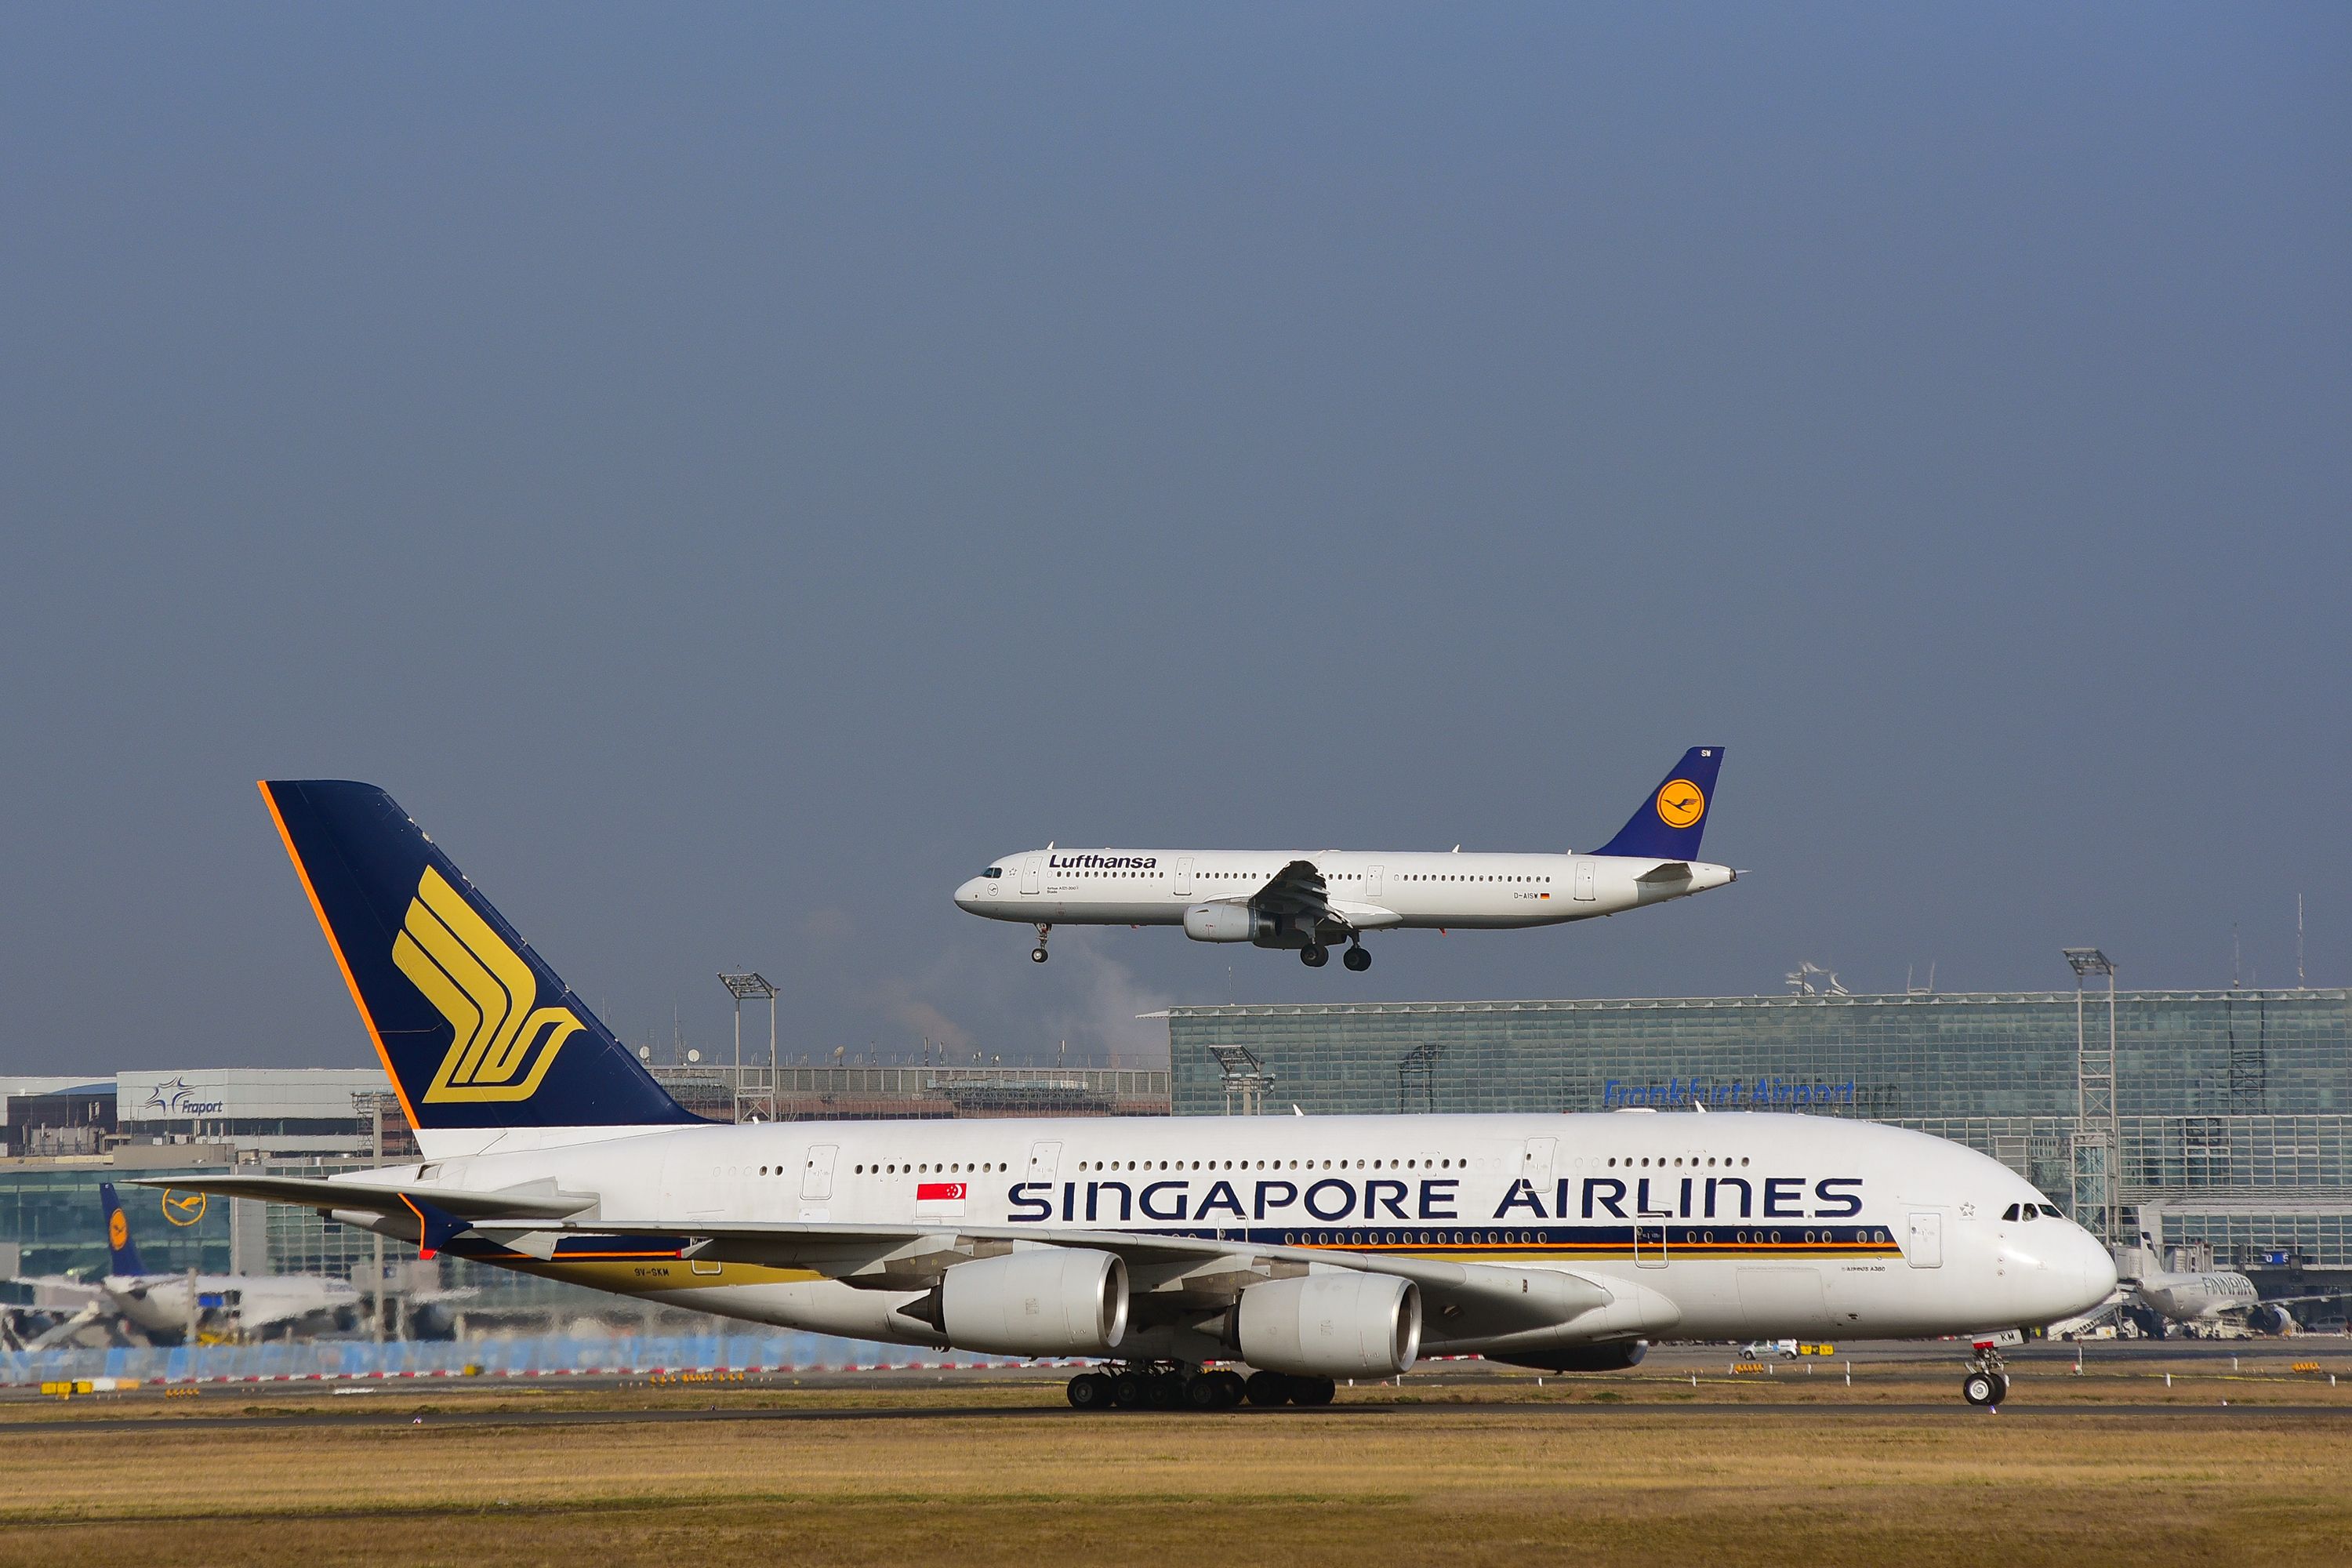 Singapore Airlines Airbus A380 taxiing through Frankfurt Airport.